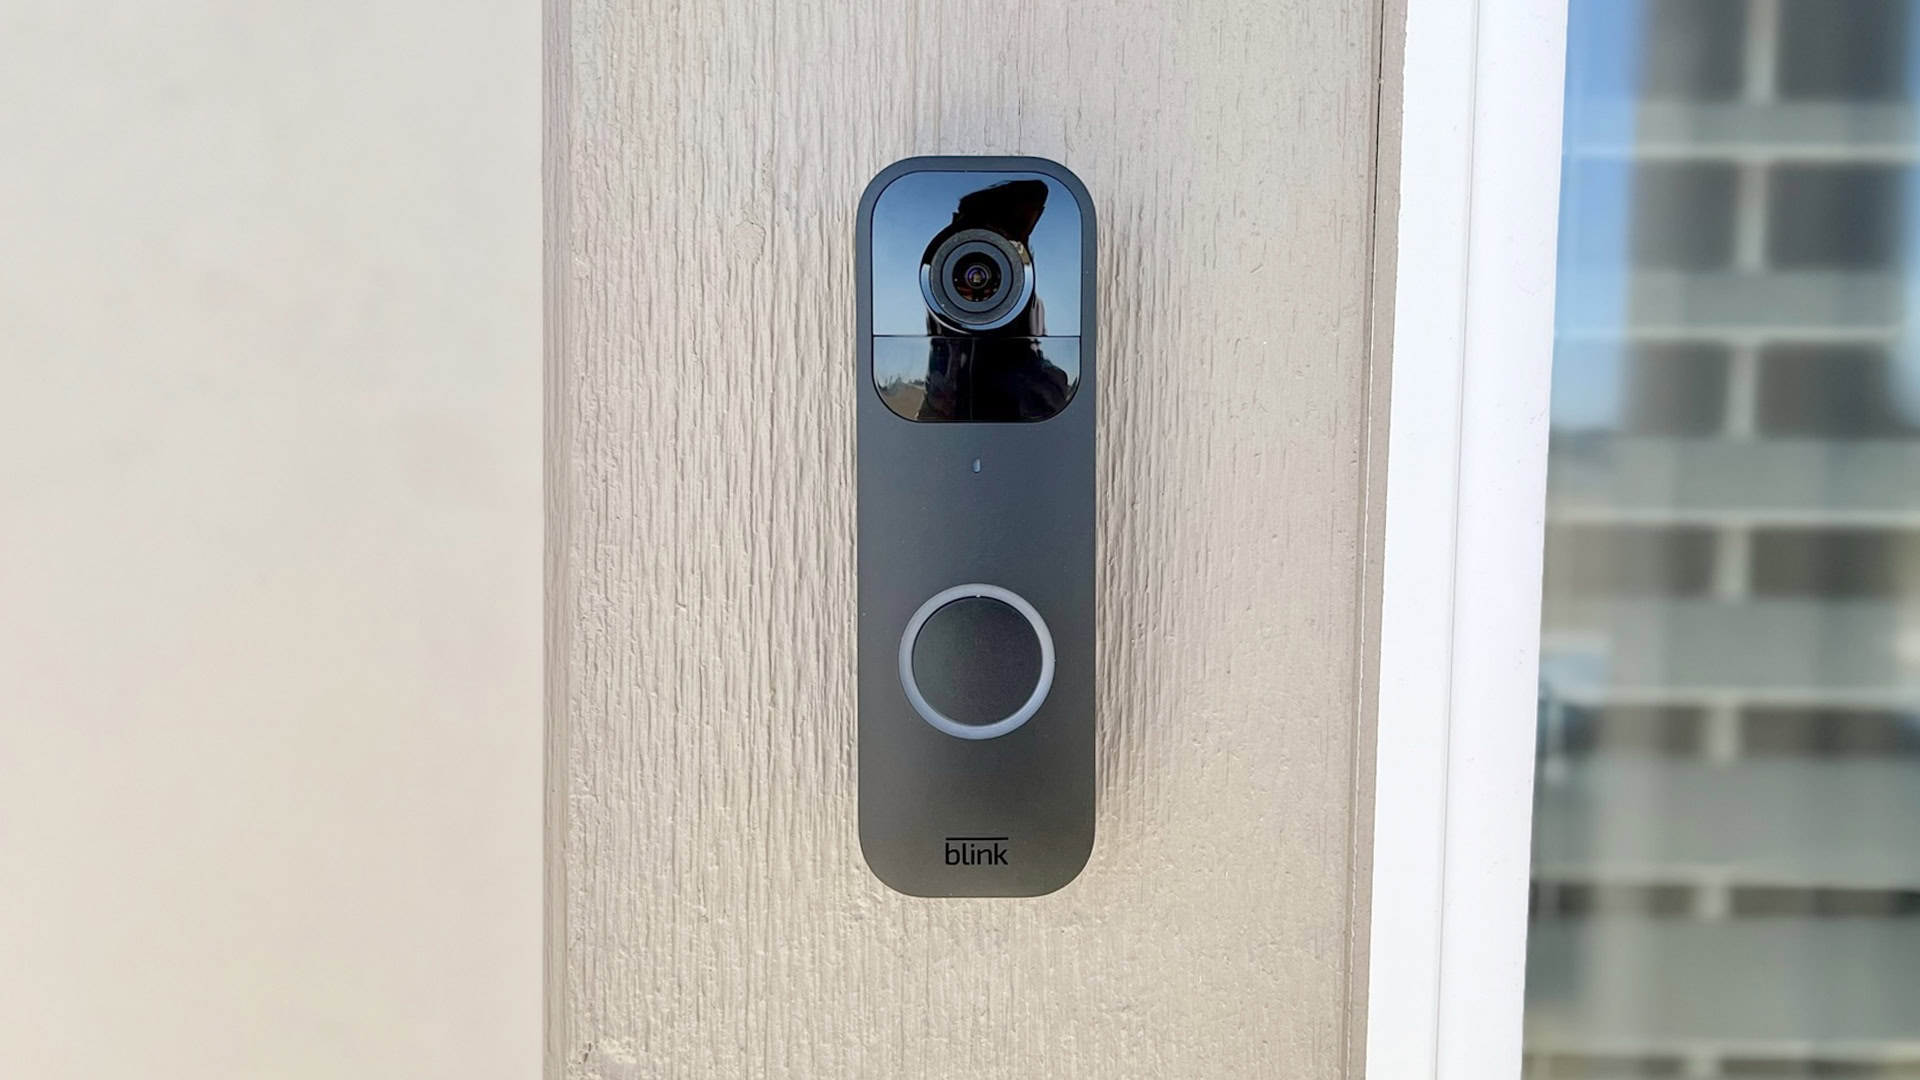 A head-on view of the Blink Video Doorbell